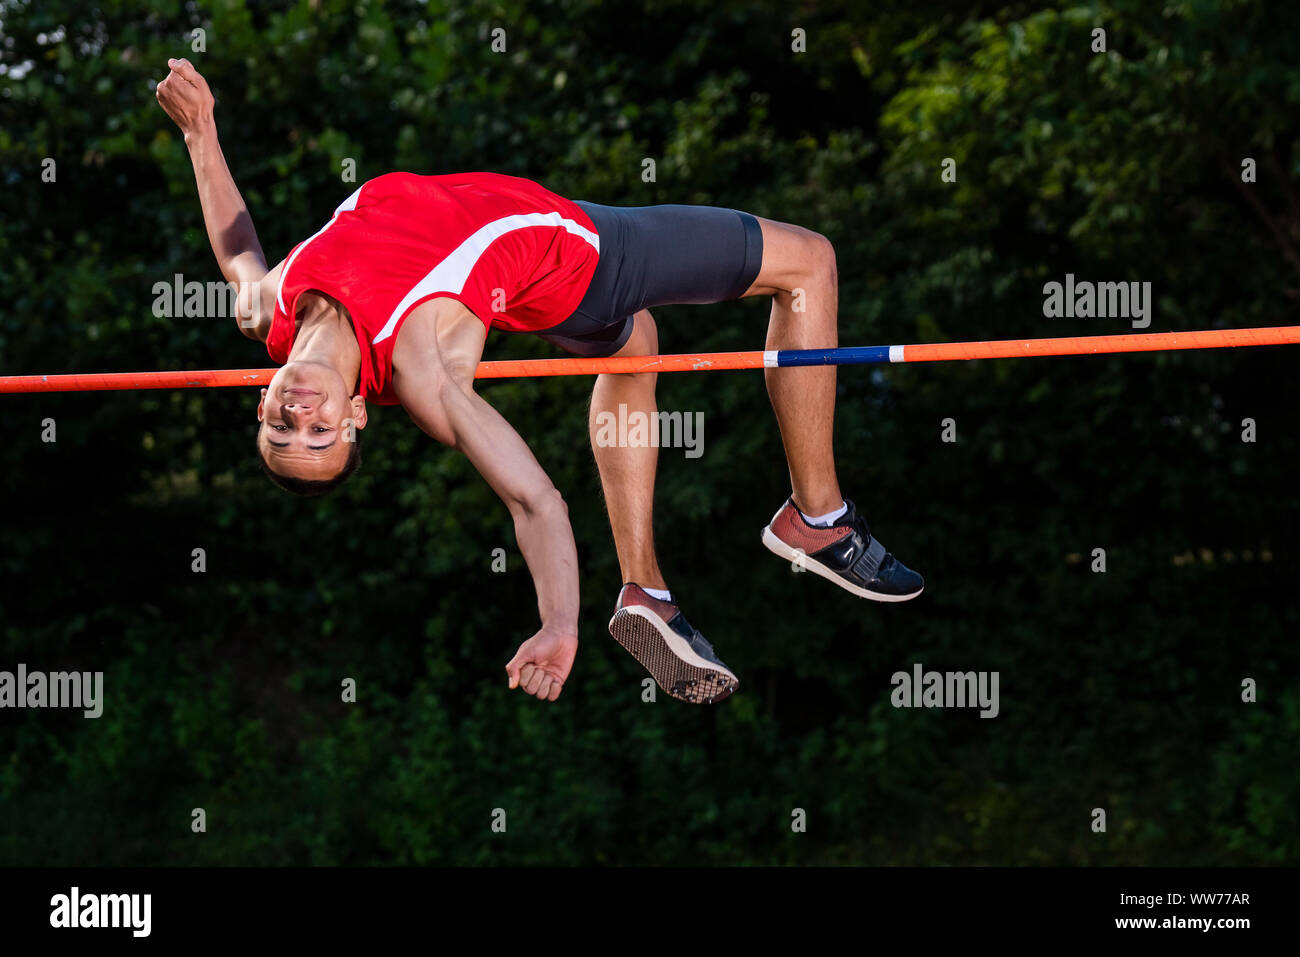 Teenager, 19 years old, high jump, athletics Stock Photo